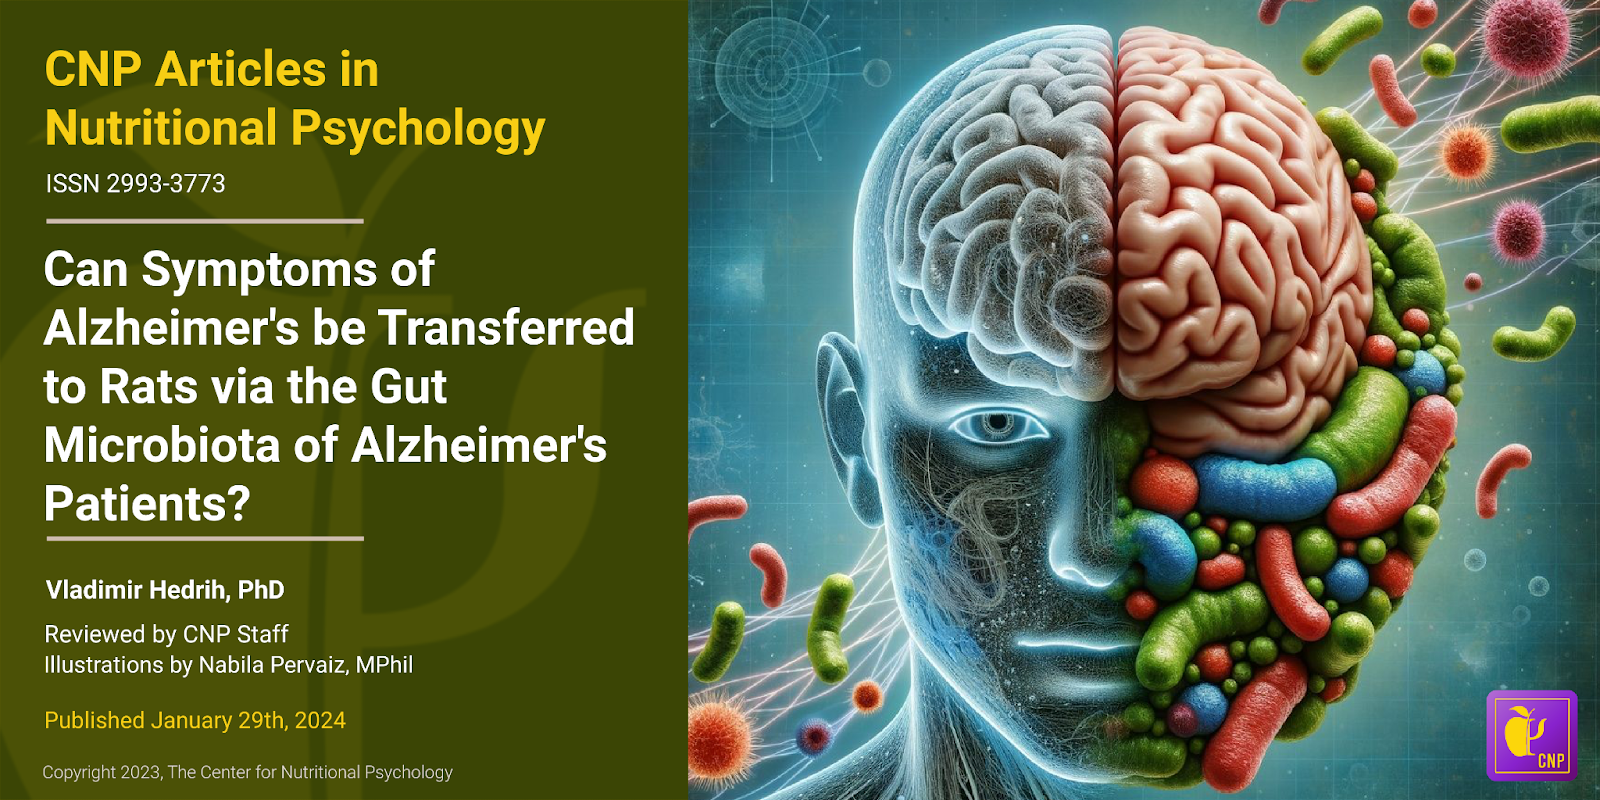 Can Symptoms of Alzheimer’s be Transferred to Rats via the Gut Microbiota of Alzheimer’s Patients?